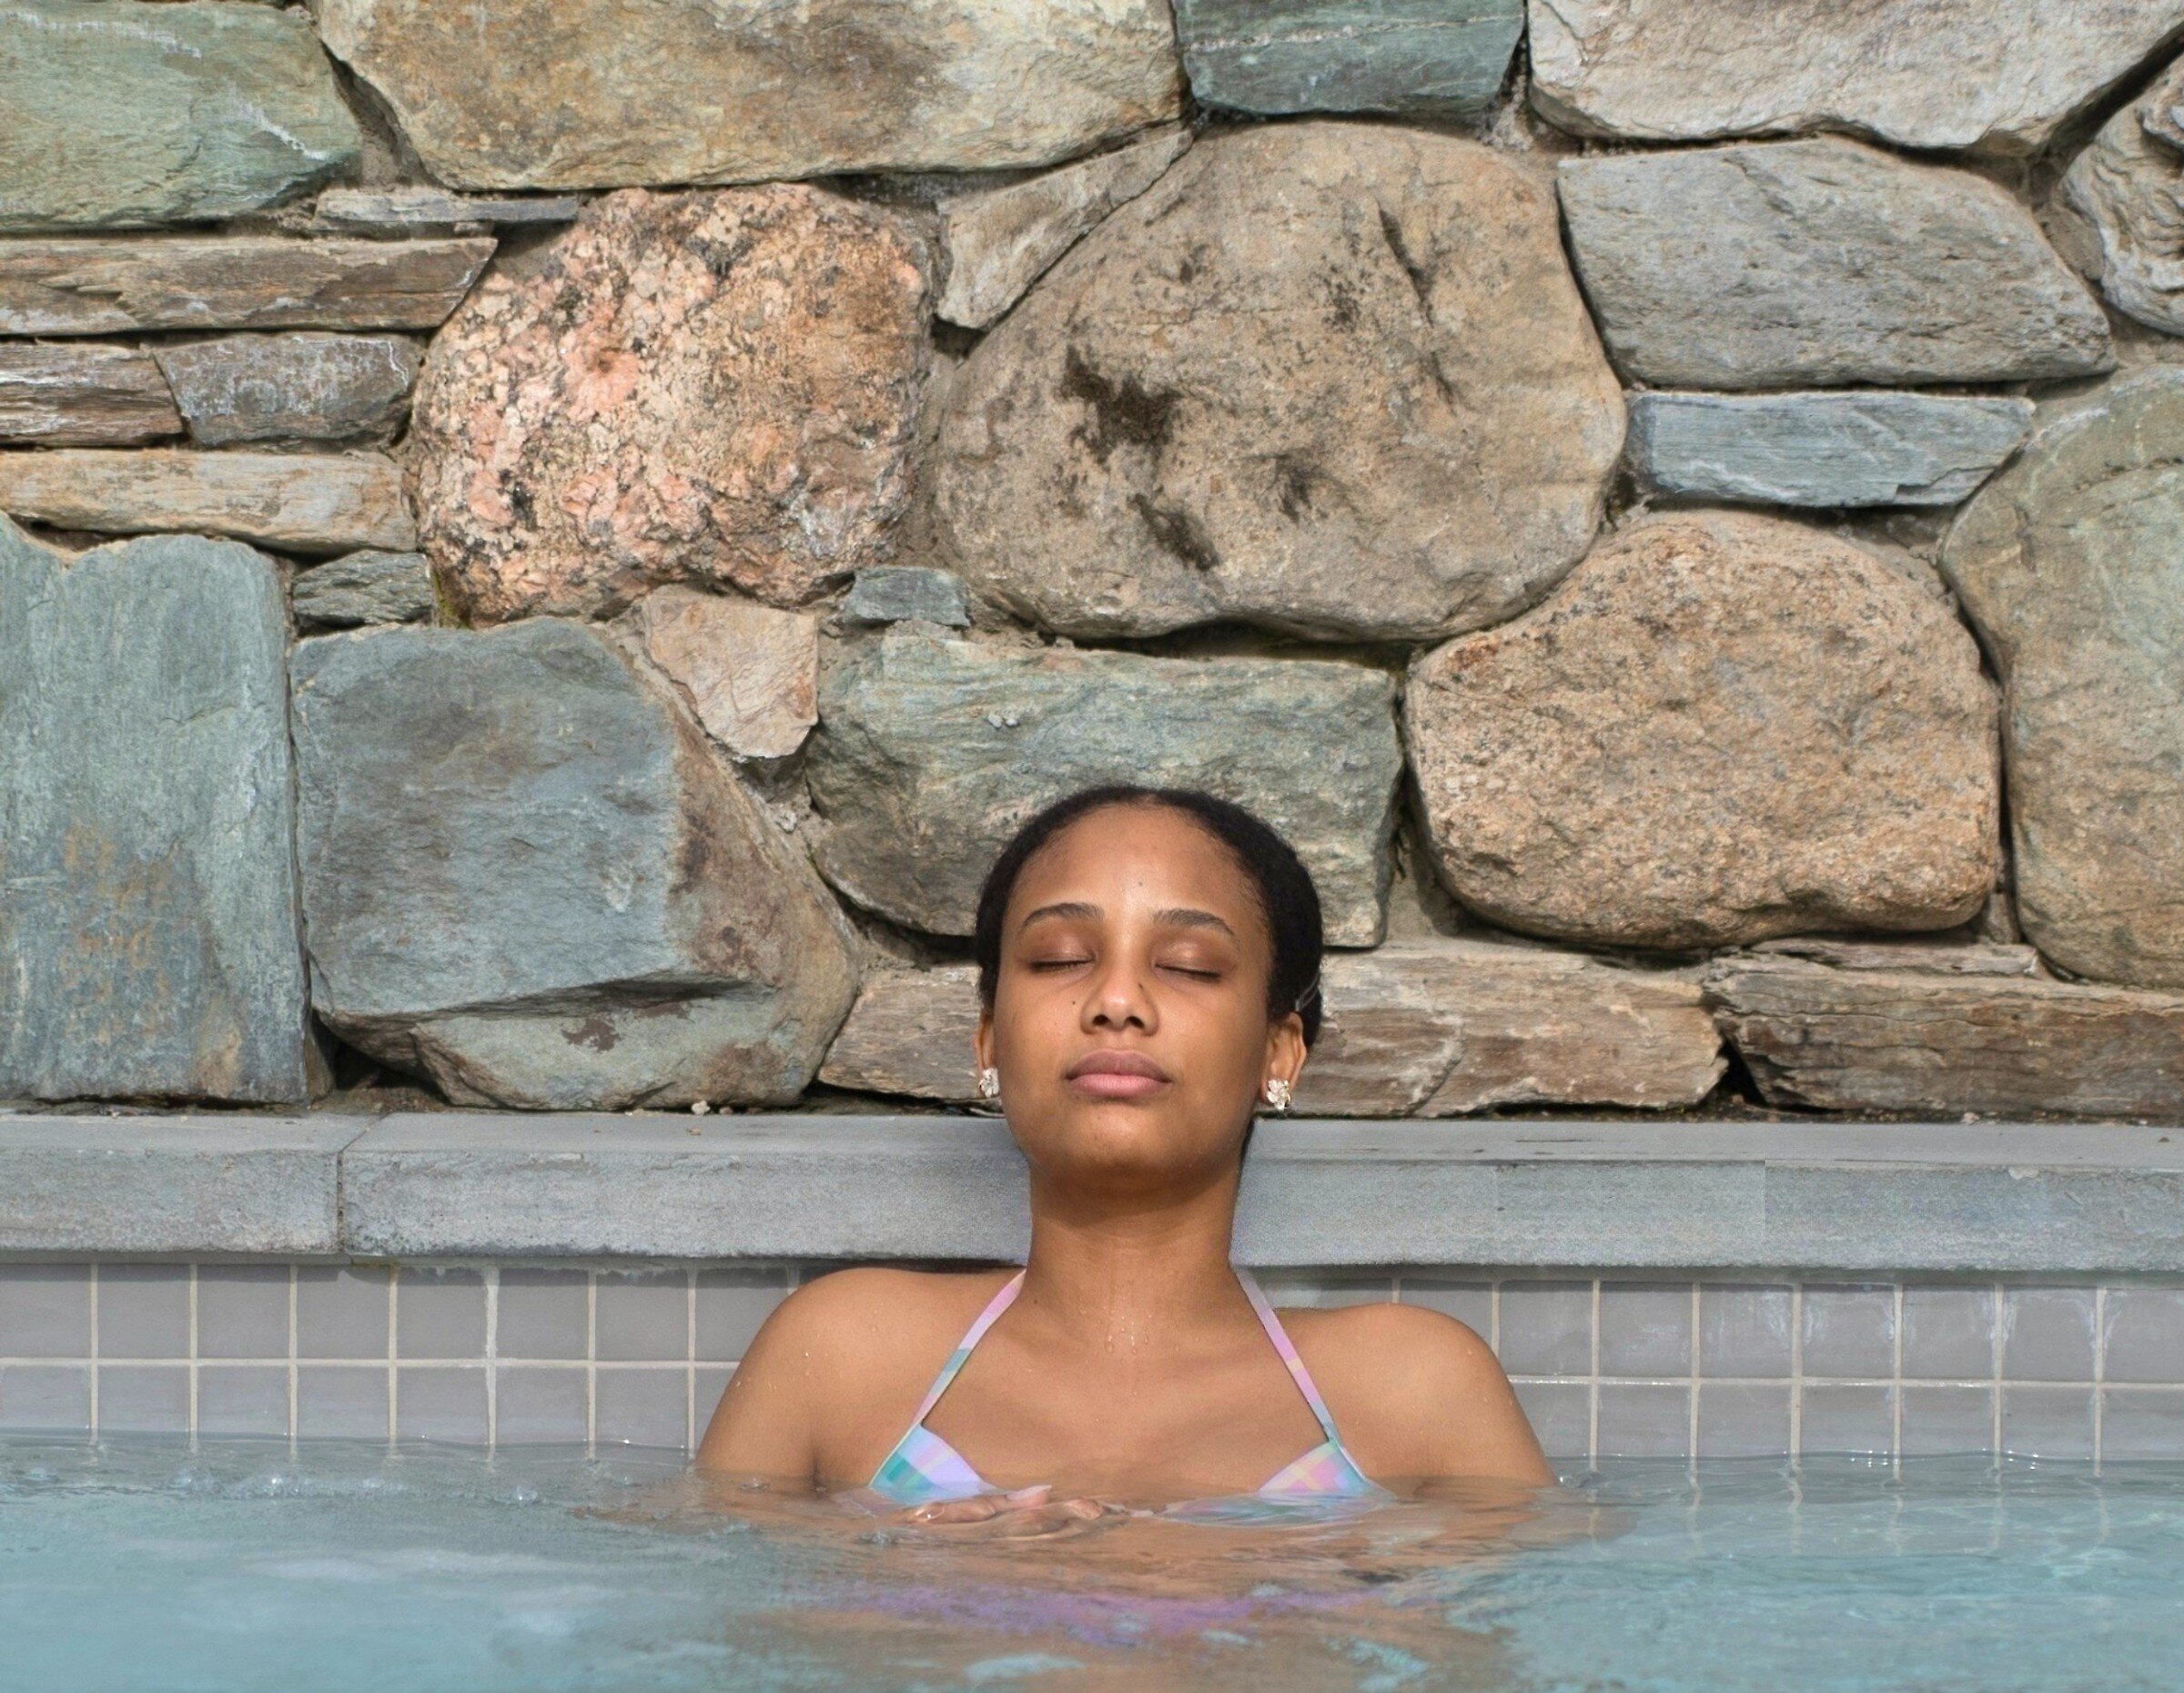 A woman in the Spa hottub